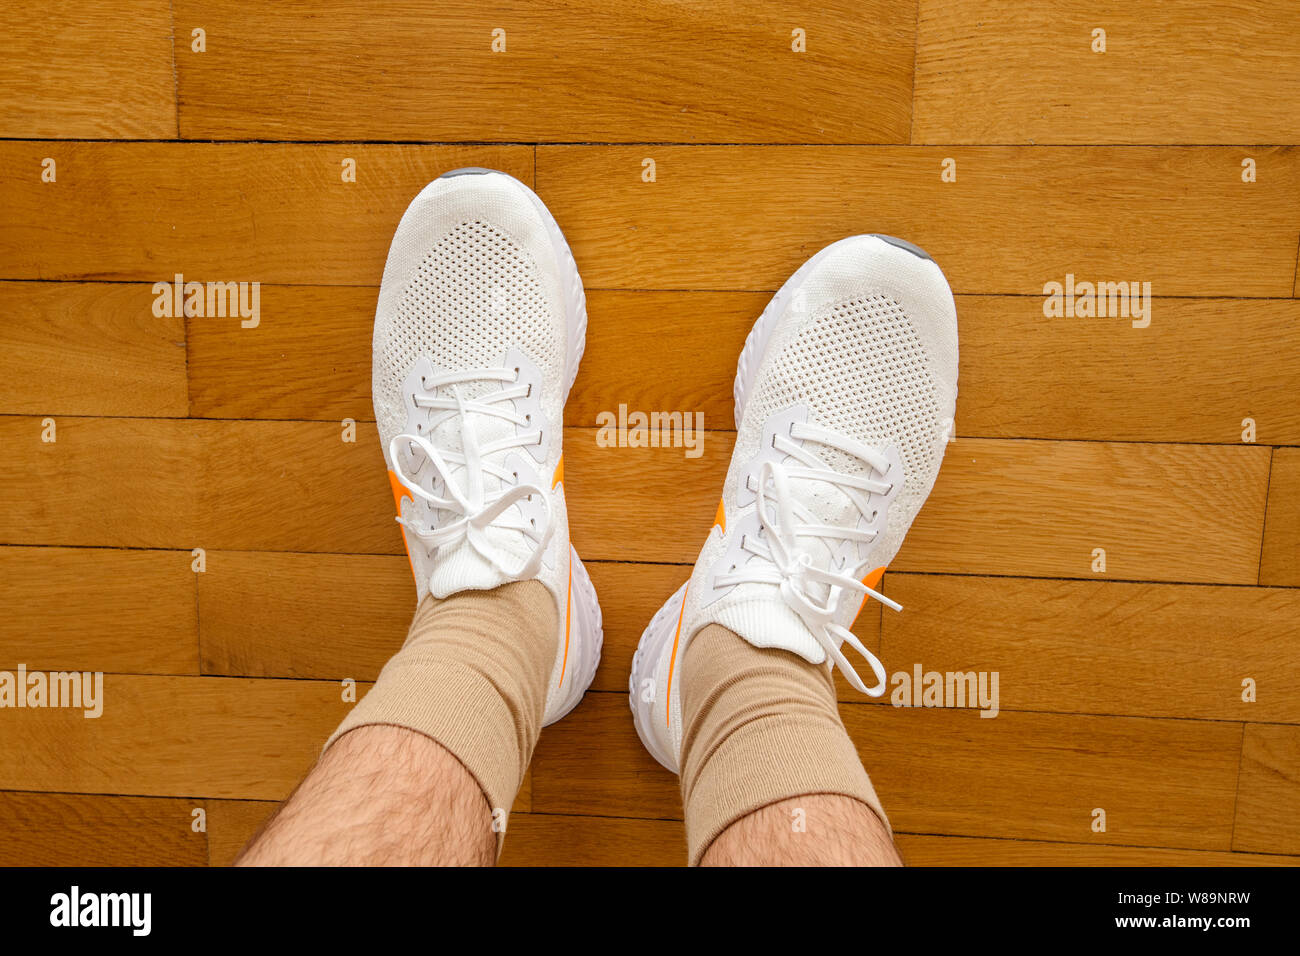 Wearing Nike Shoes High Resolution Stock Photography and Images - Alamy